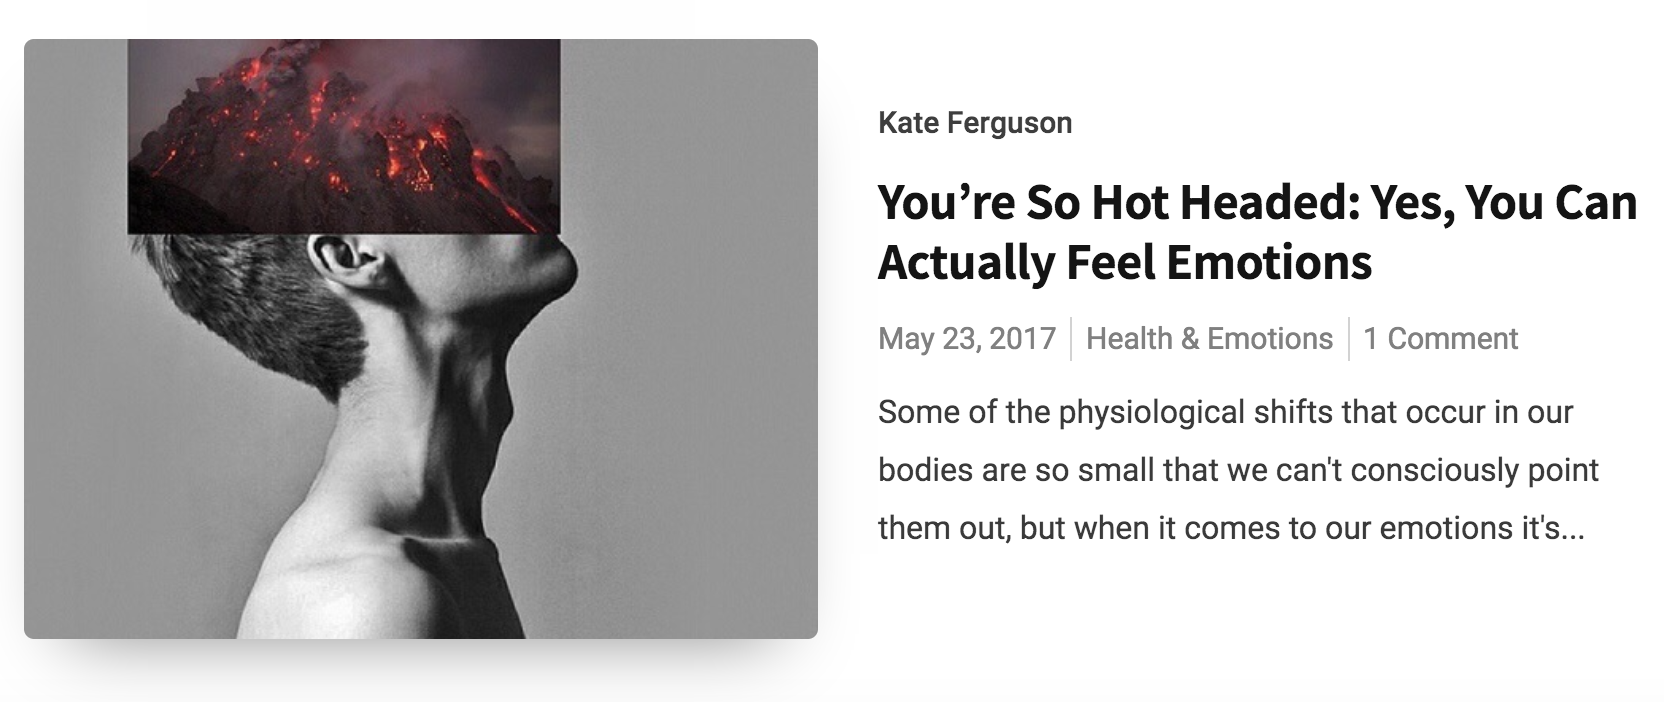  - “You’re So Hot Headed: Yes, You Can Actually Feel Emotions”Published on Psych N Sex